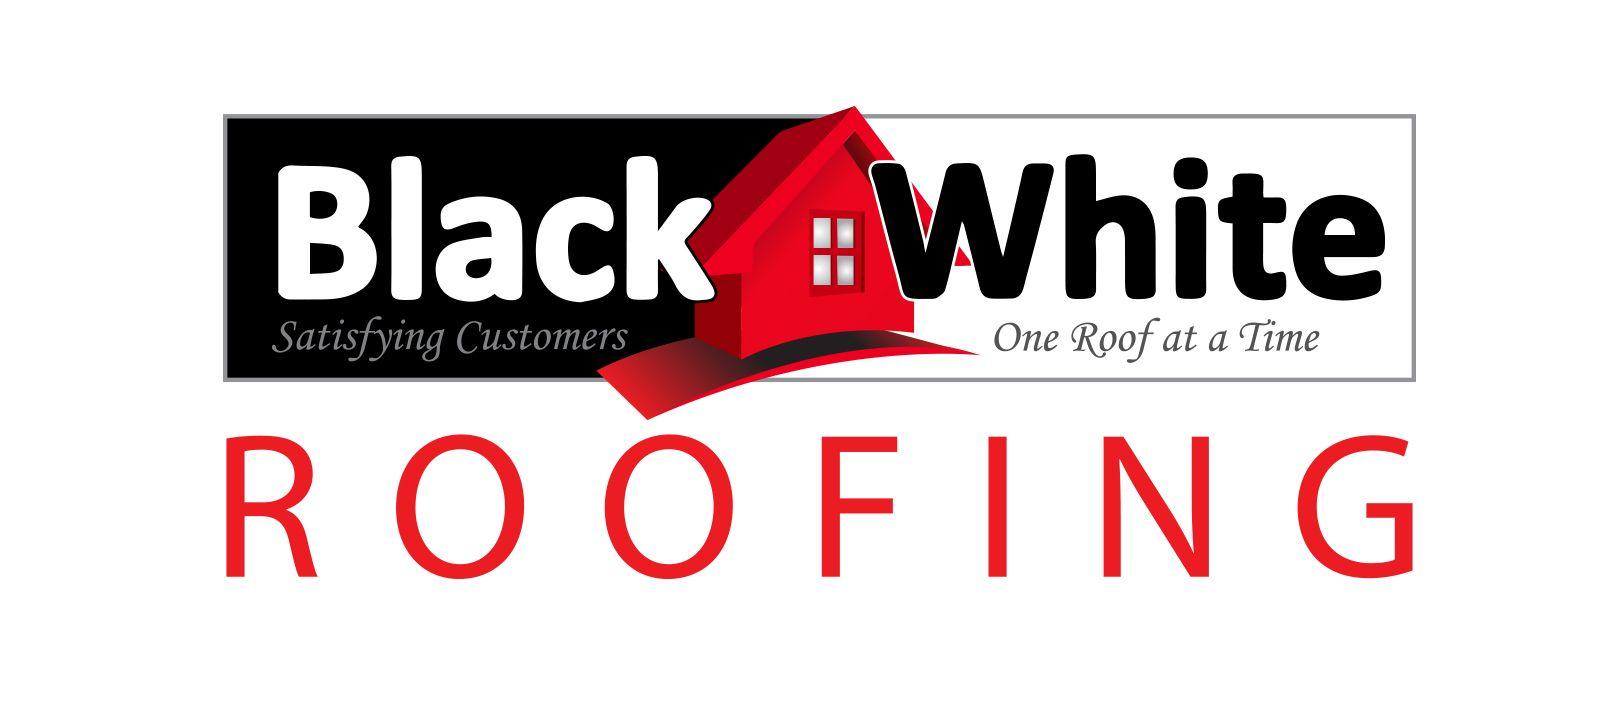 Black and Red Roof Logo - Black & White Roofing. Better Business Bureau® Profile